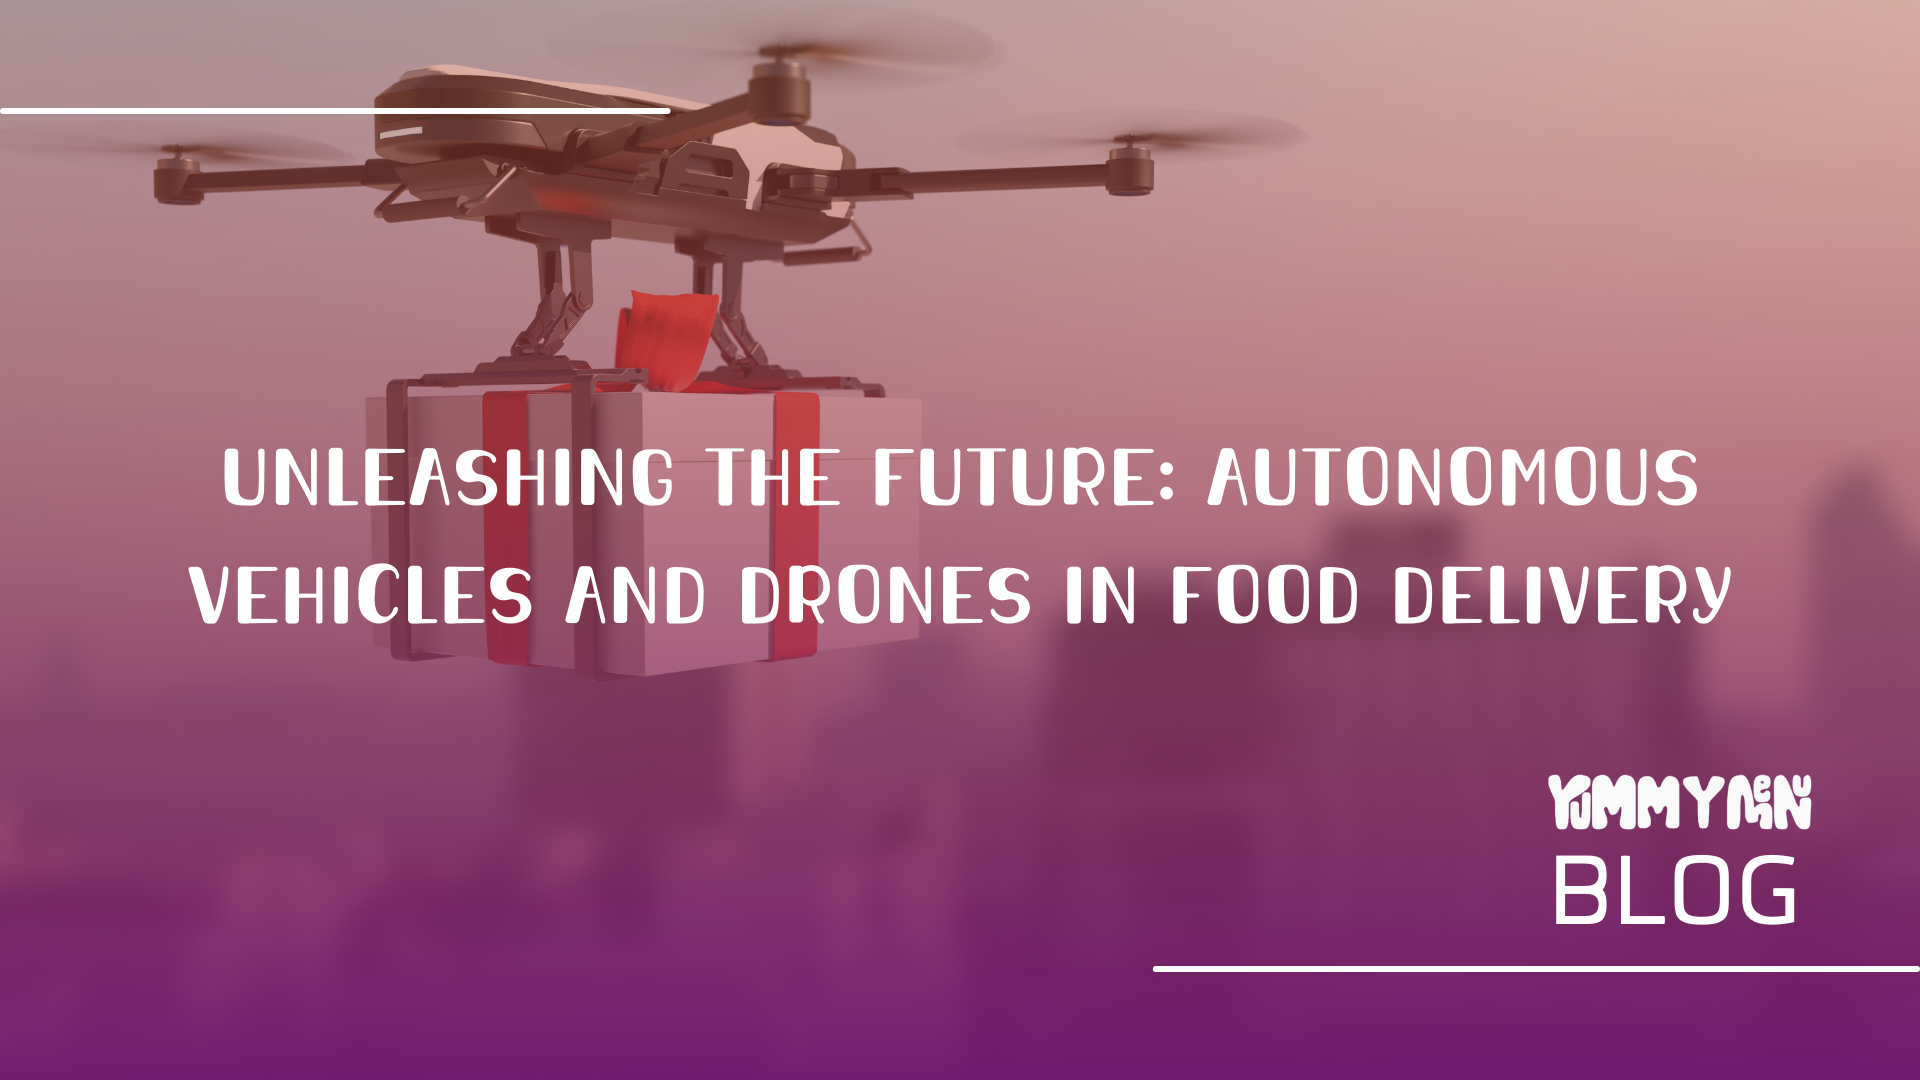 Unleashing the Future: Autonomous Vehicles and Drones in Food Delivery